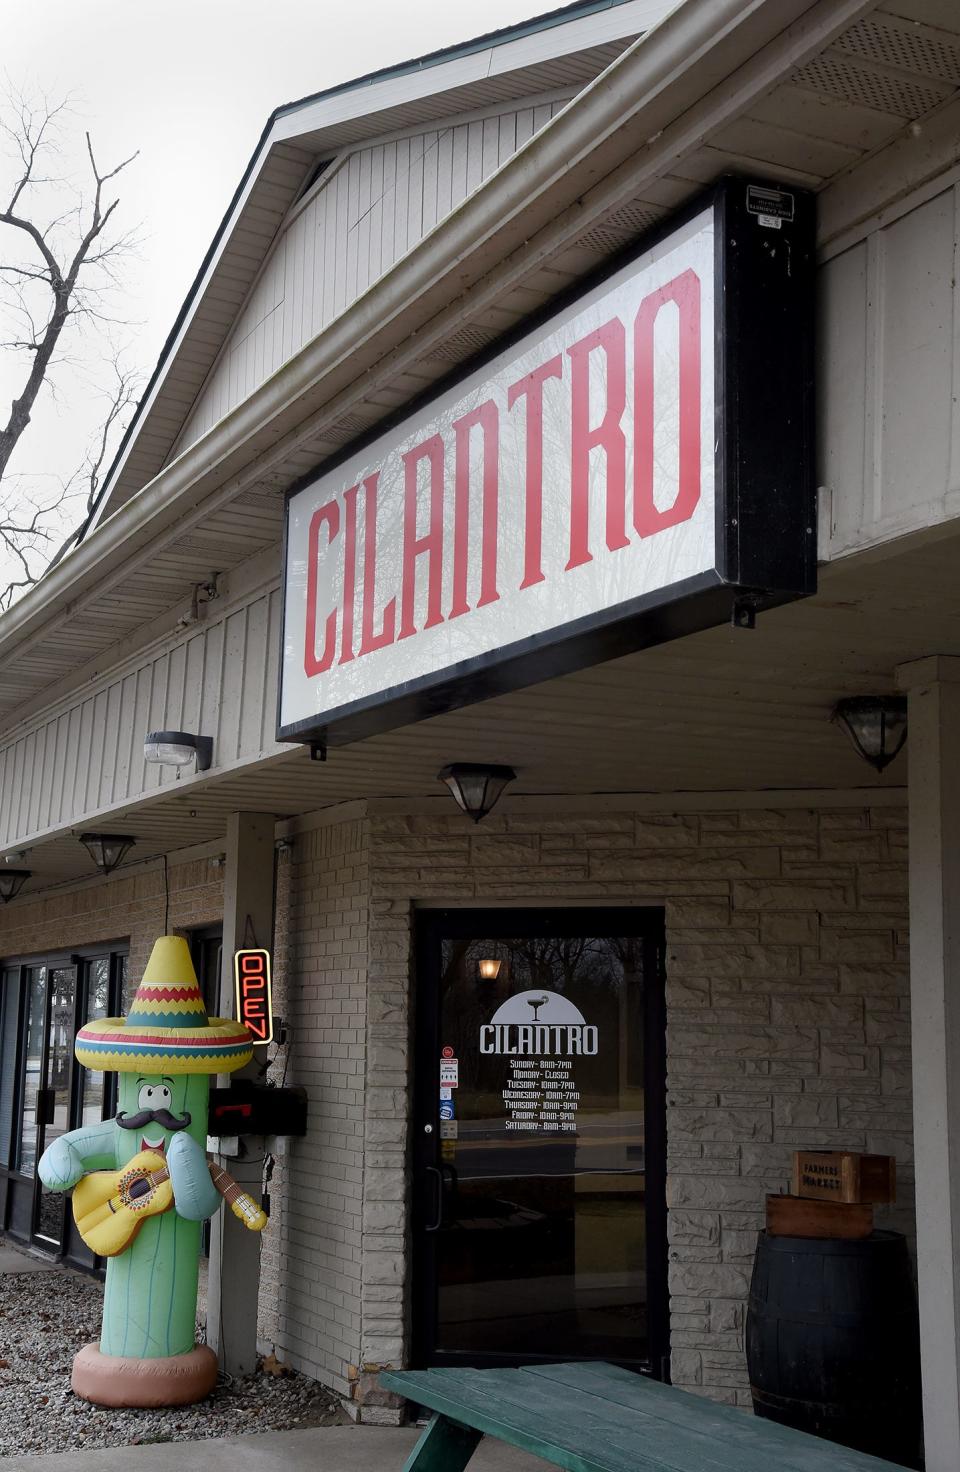 Carlos the Cactus is a draw at Cilantro Mexican Restaurant in Dundee. "Kids have their picture taken with Carlos," said owner Miguel Angel.